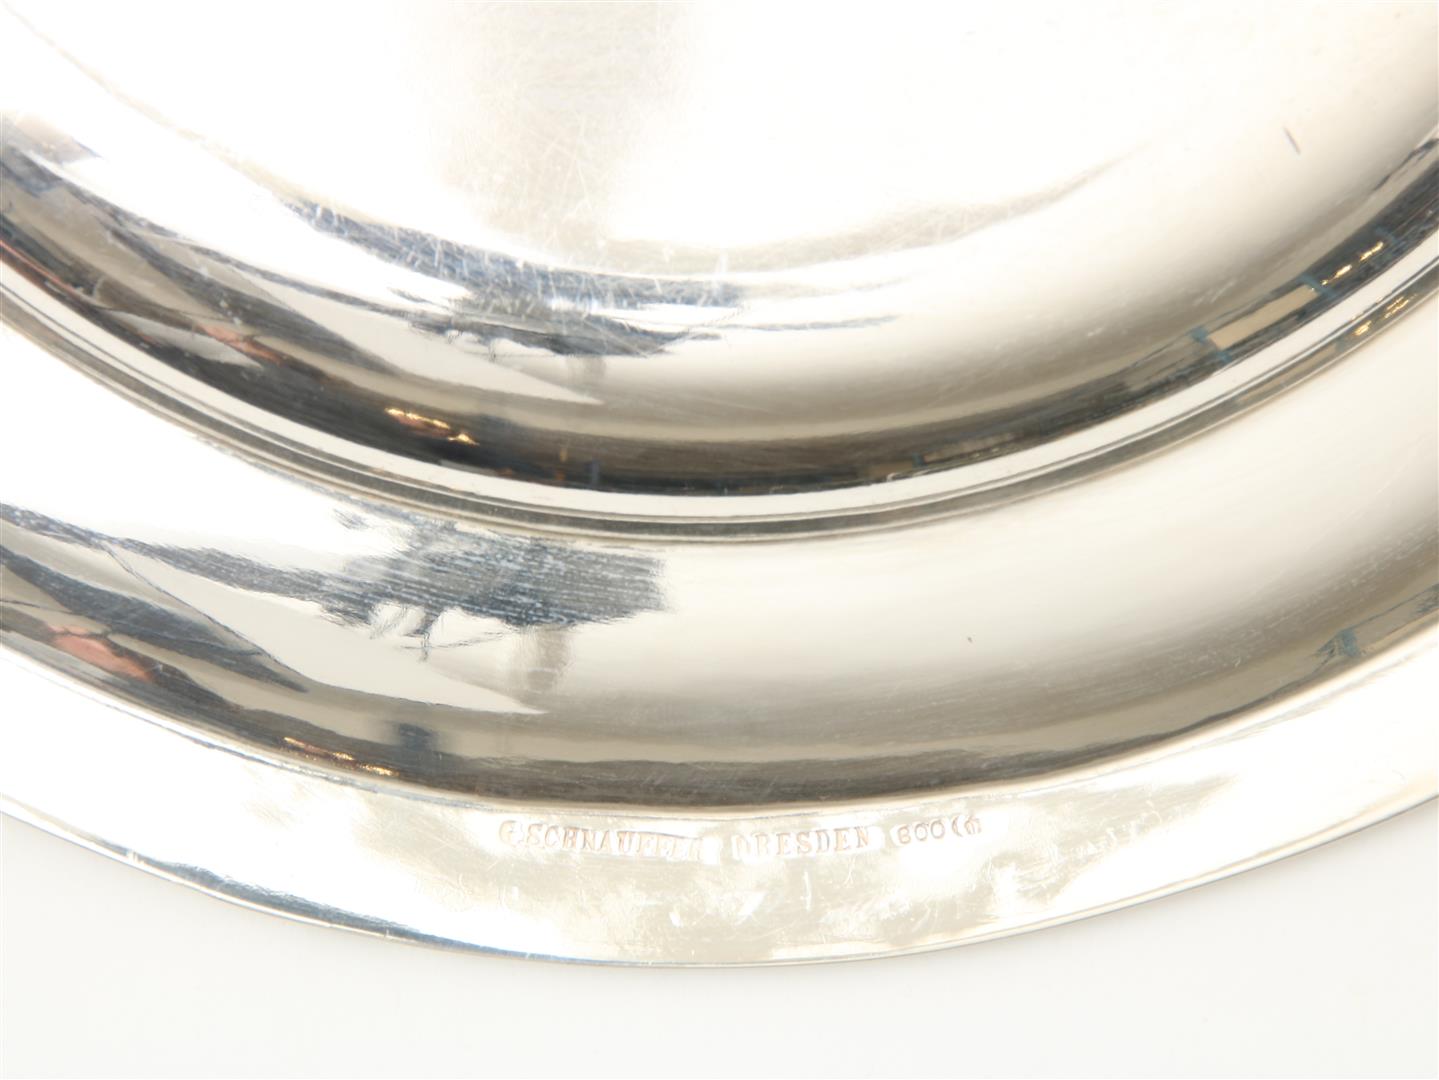 Set including silver terrine (oval covered dish 33x 25 cm under lid) with removable handle, - Image 4 of 4